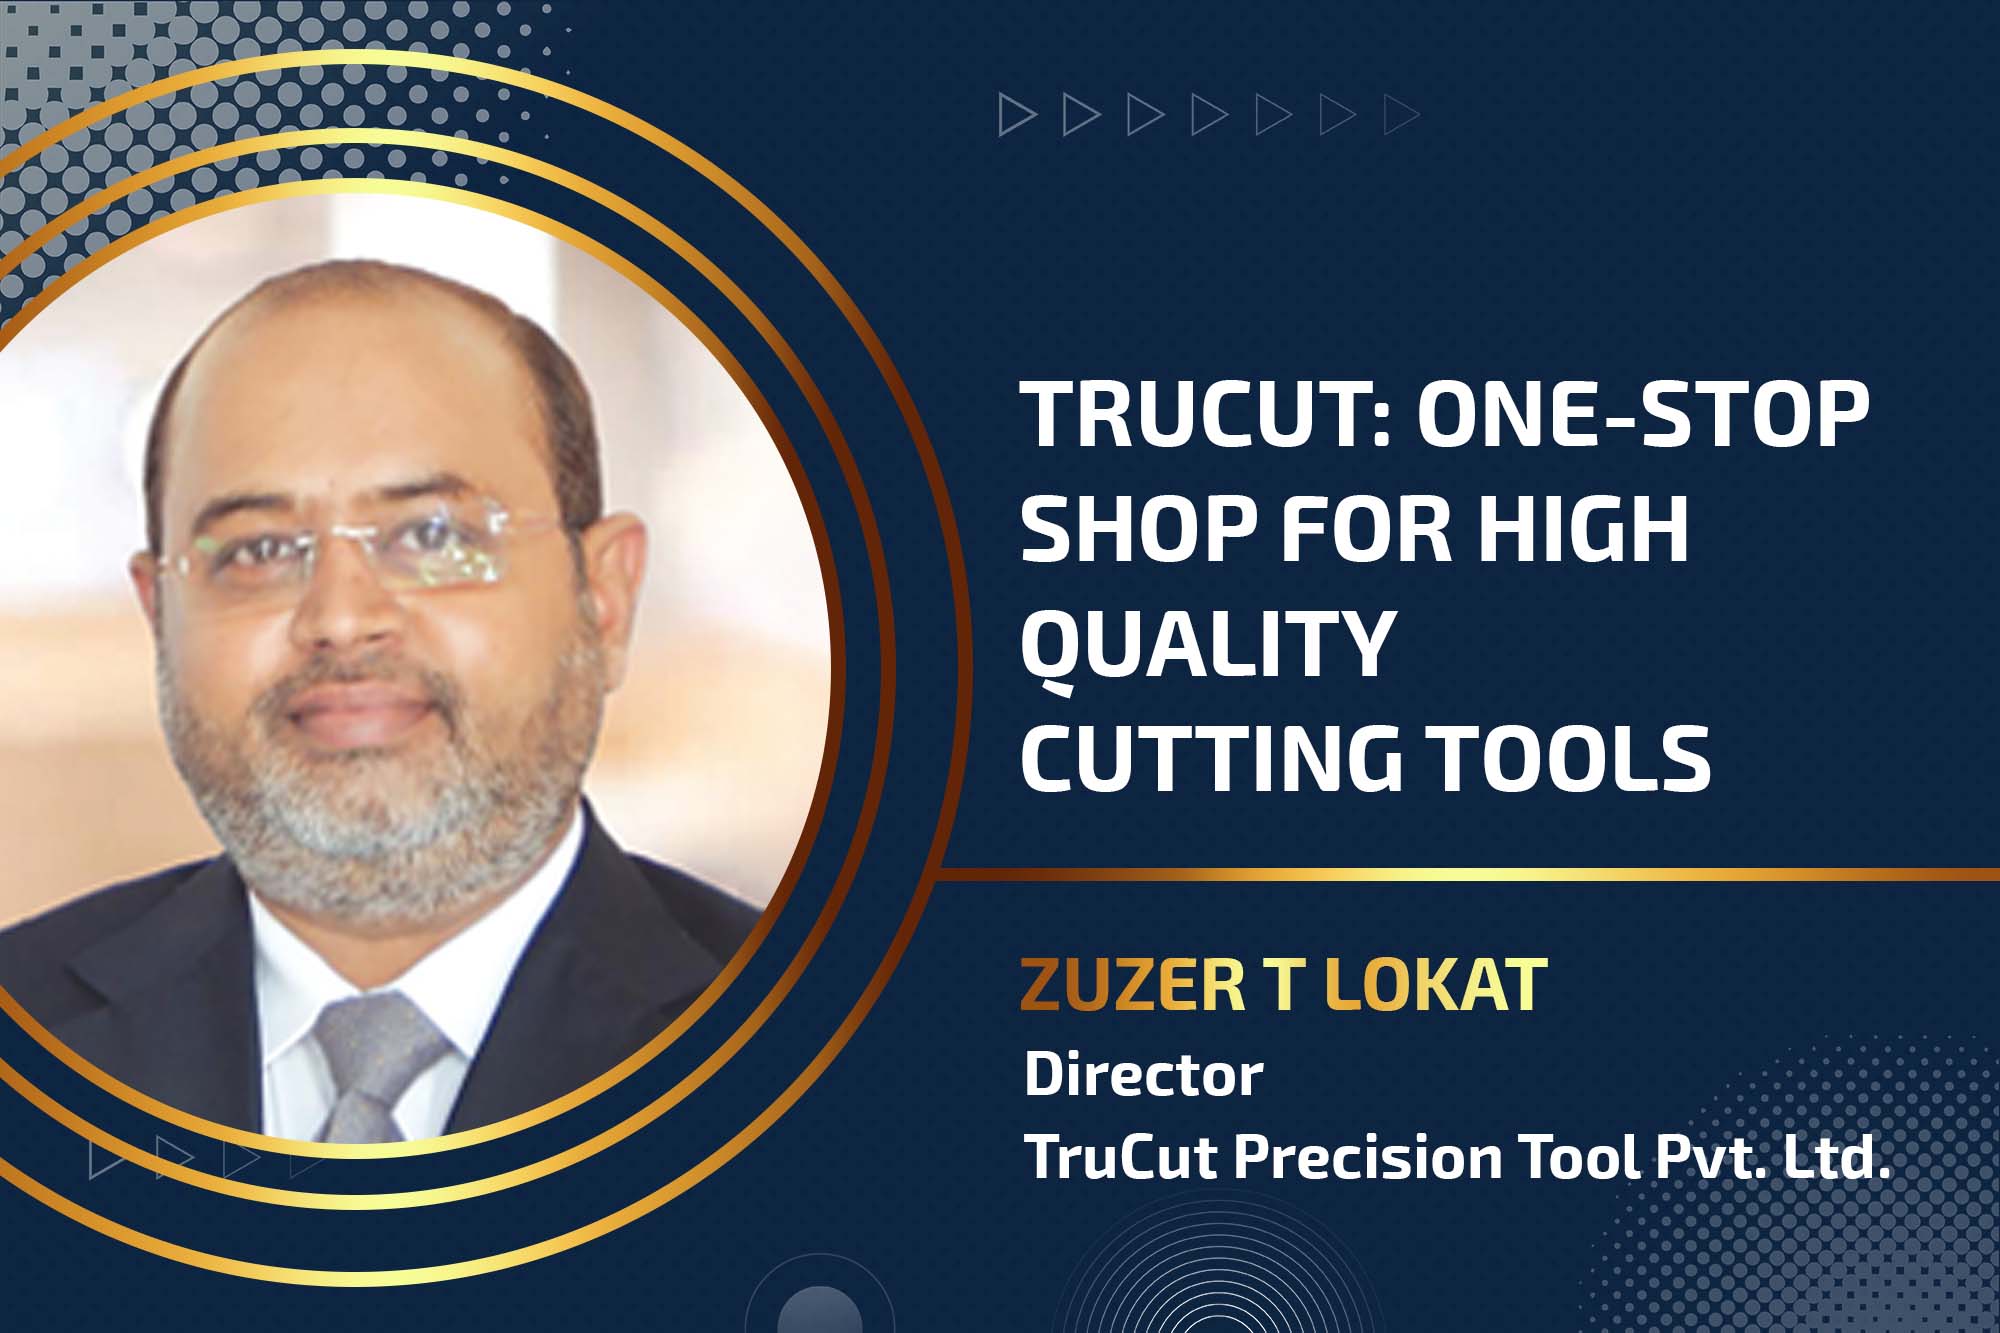 TruCut: One-stop shop for high quality cutting tools